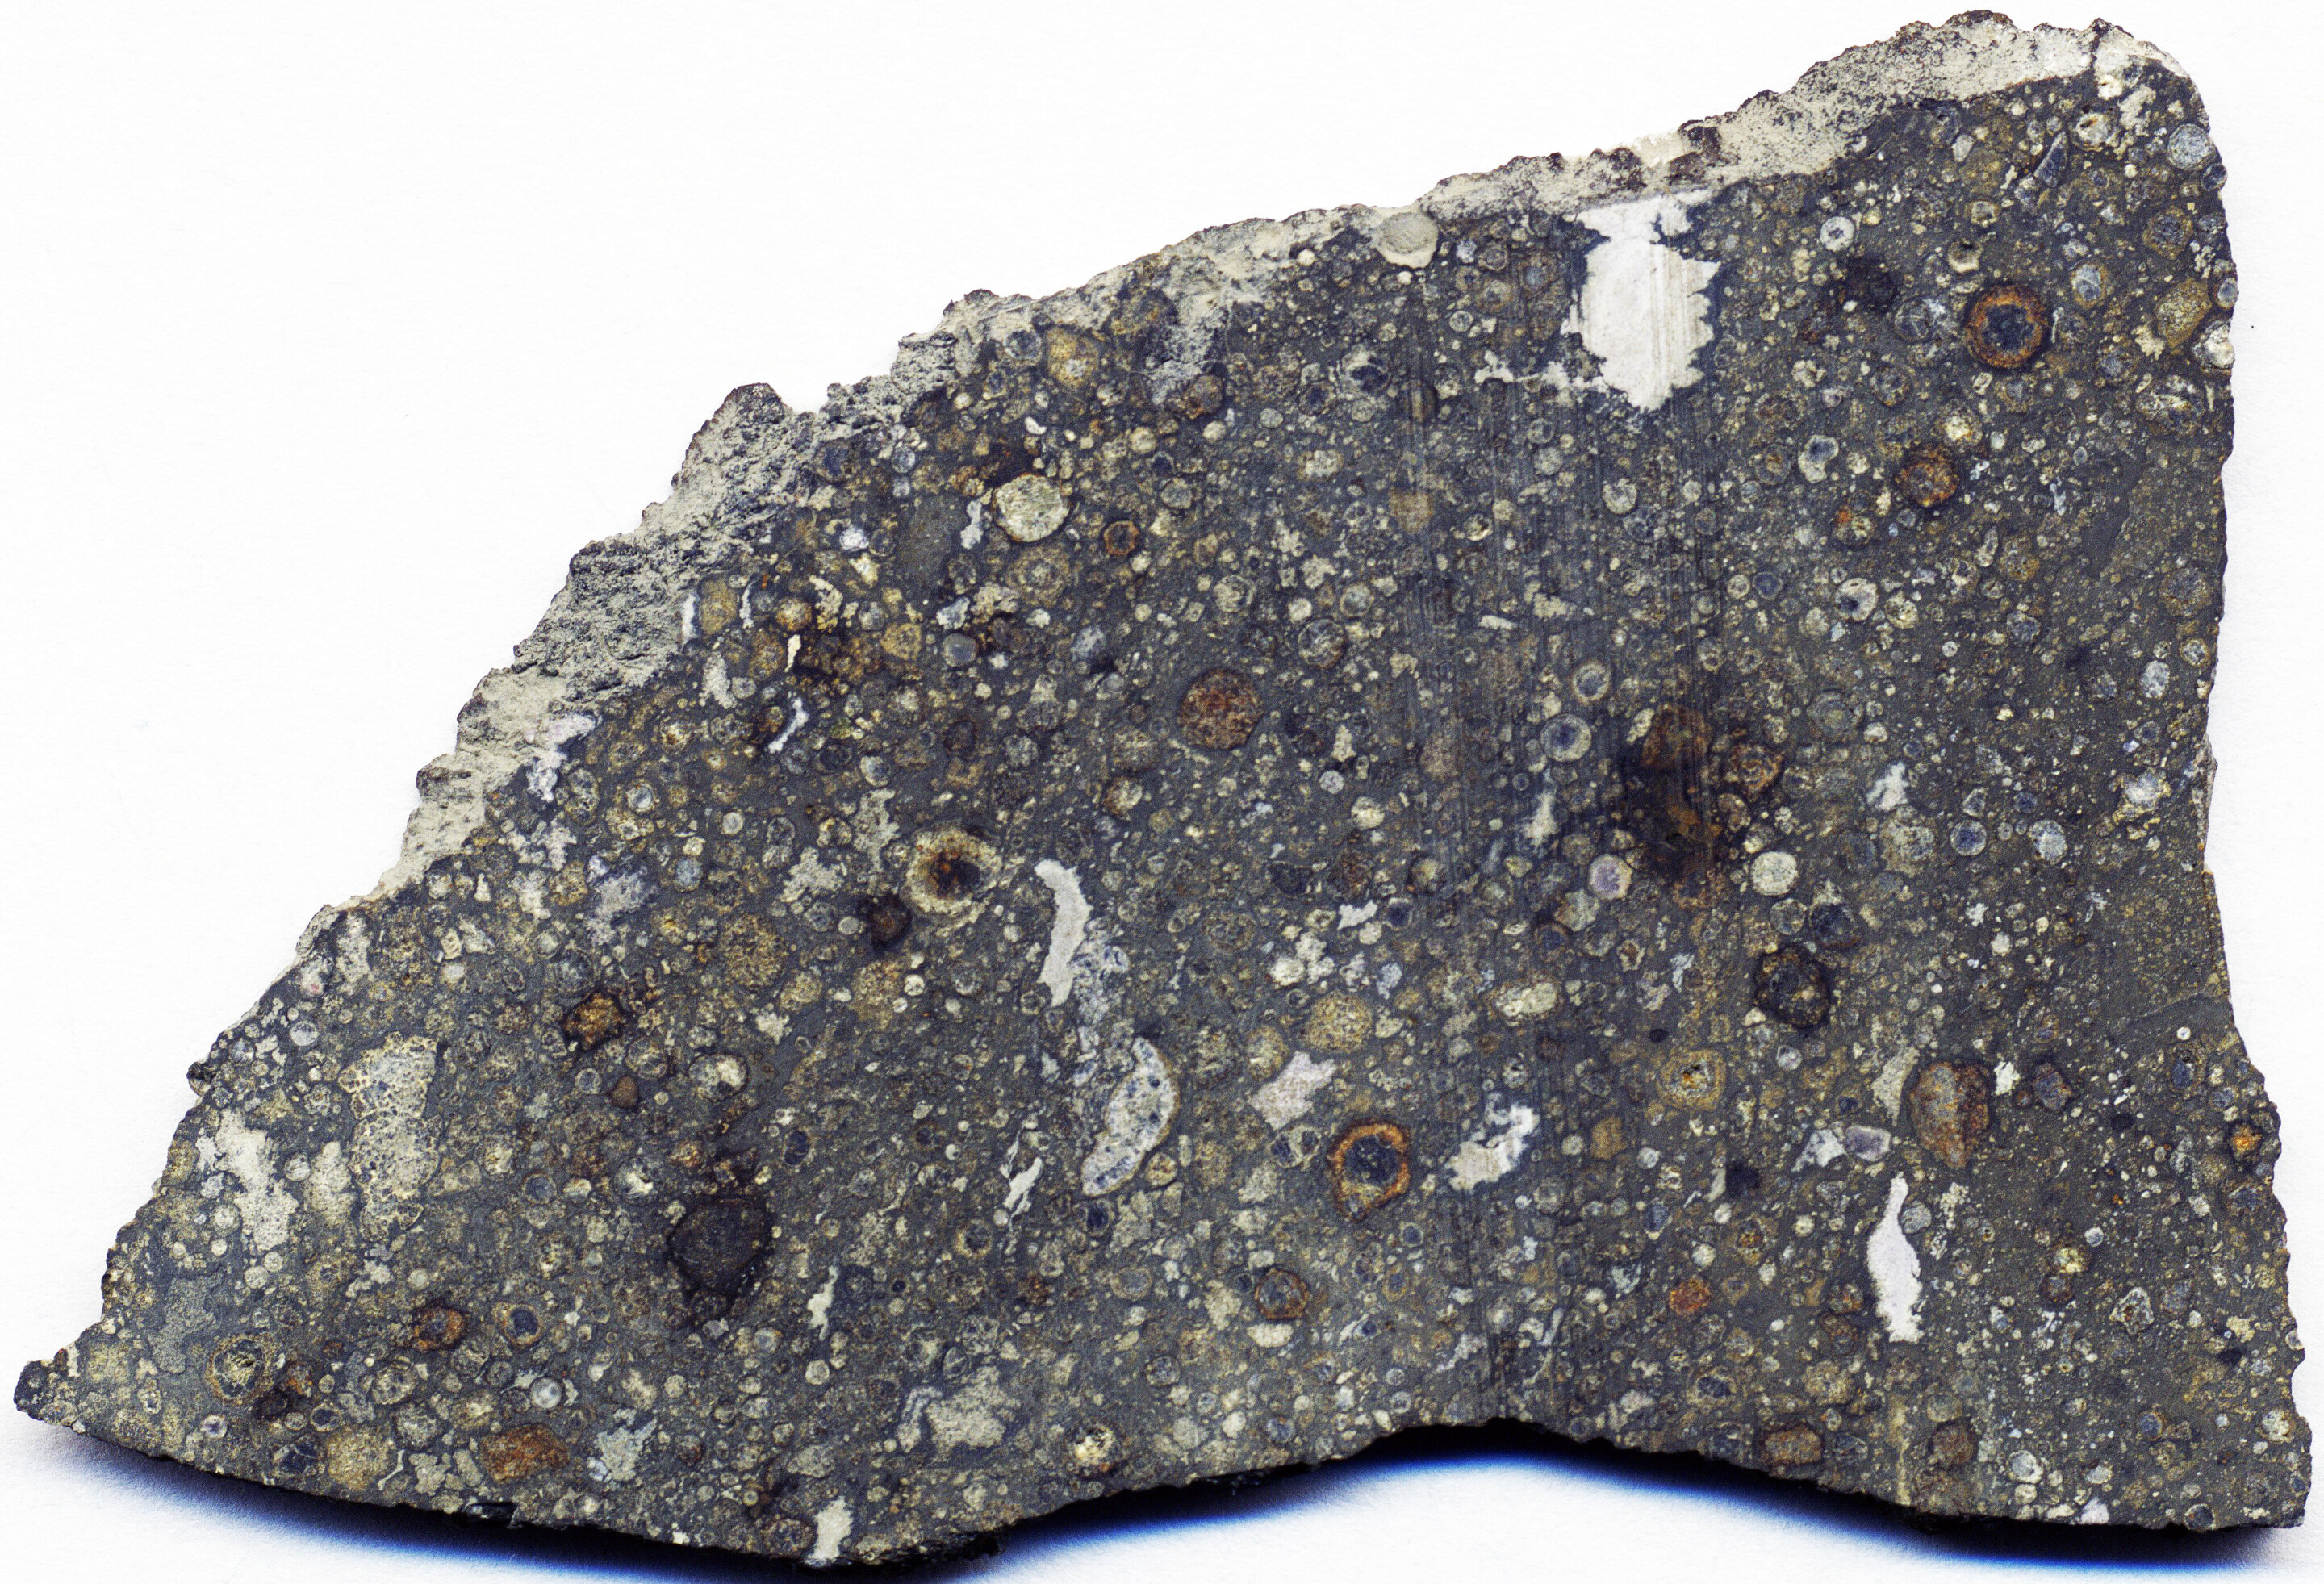 Beads of glass in meteorites help scientists piece together how solar system formed